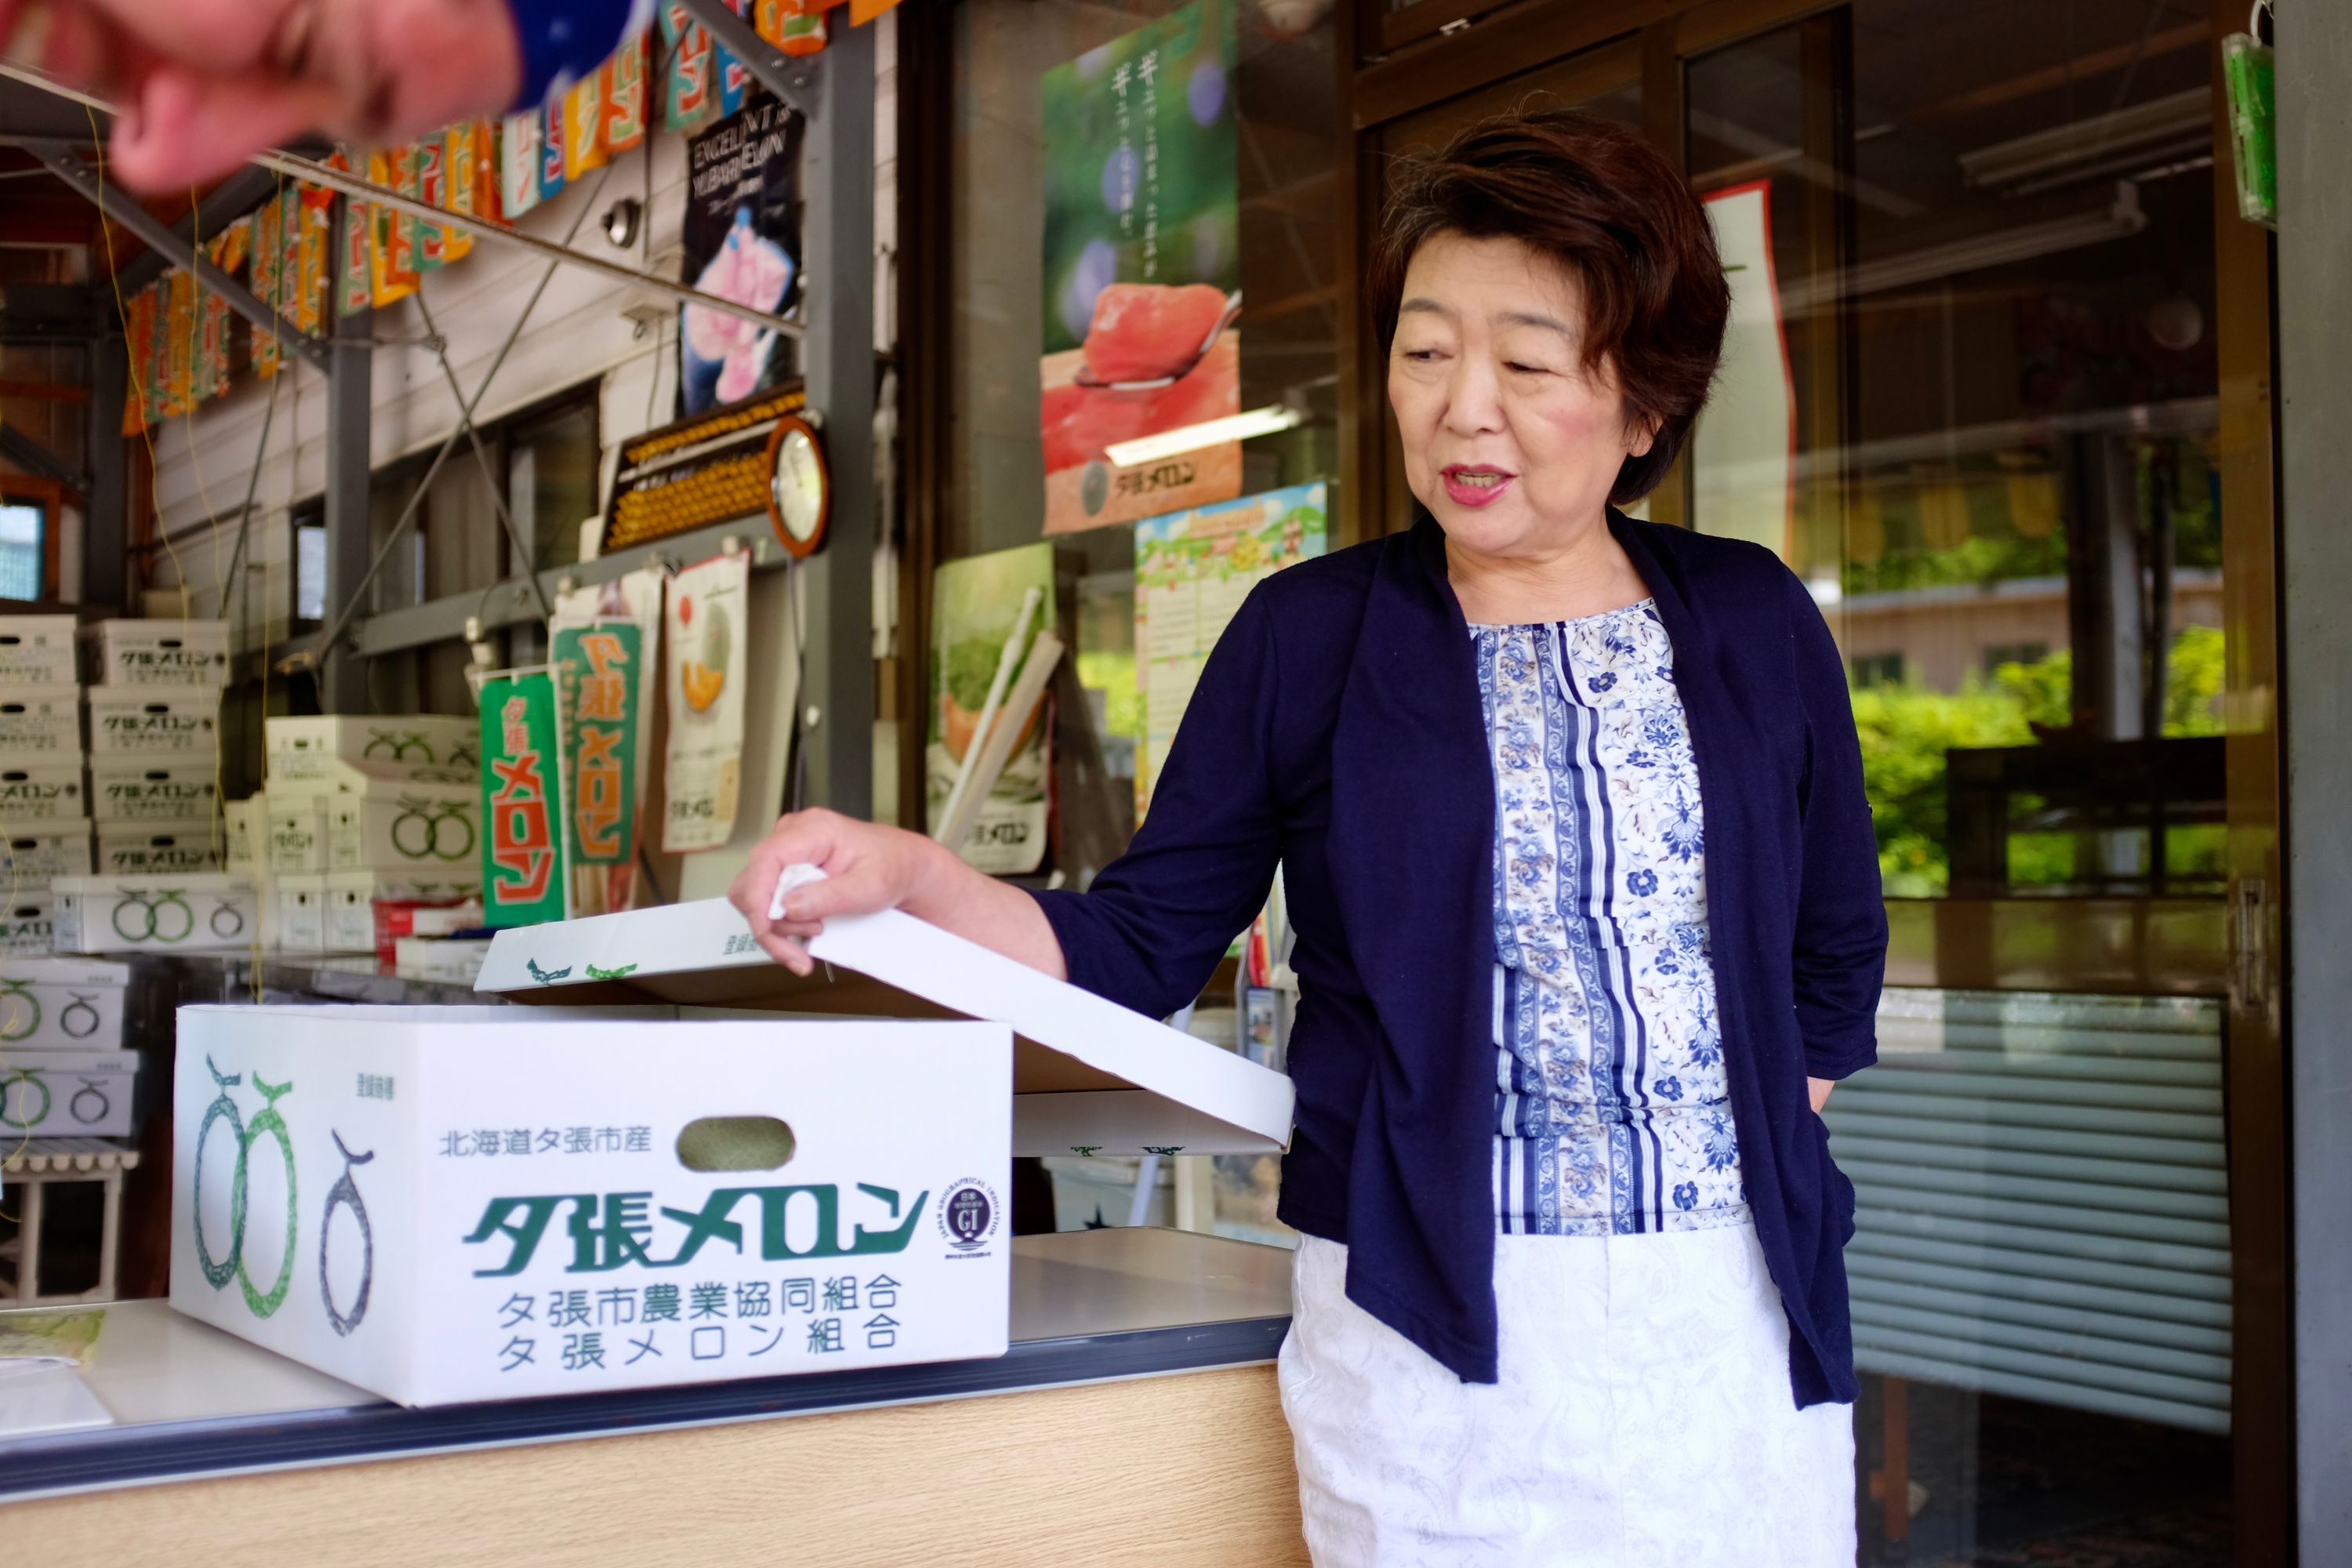 A woman selling melons looks at a crate labelled “Yūbari Melon”.